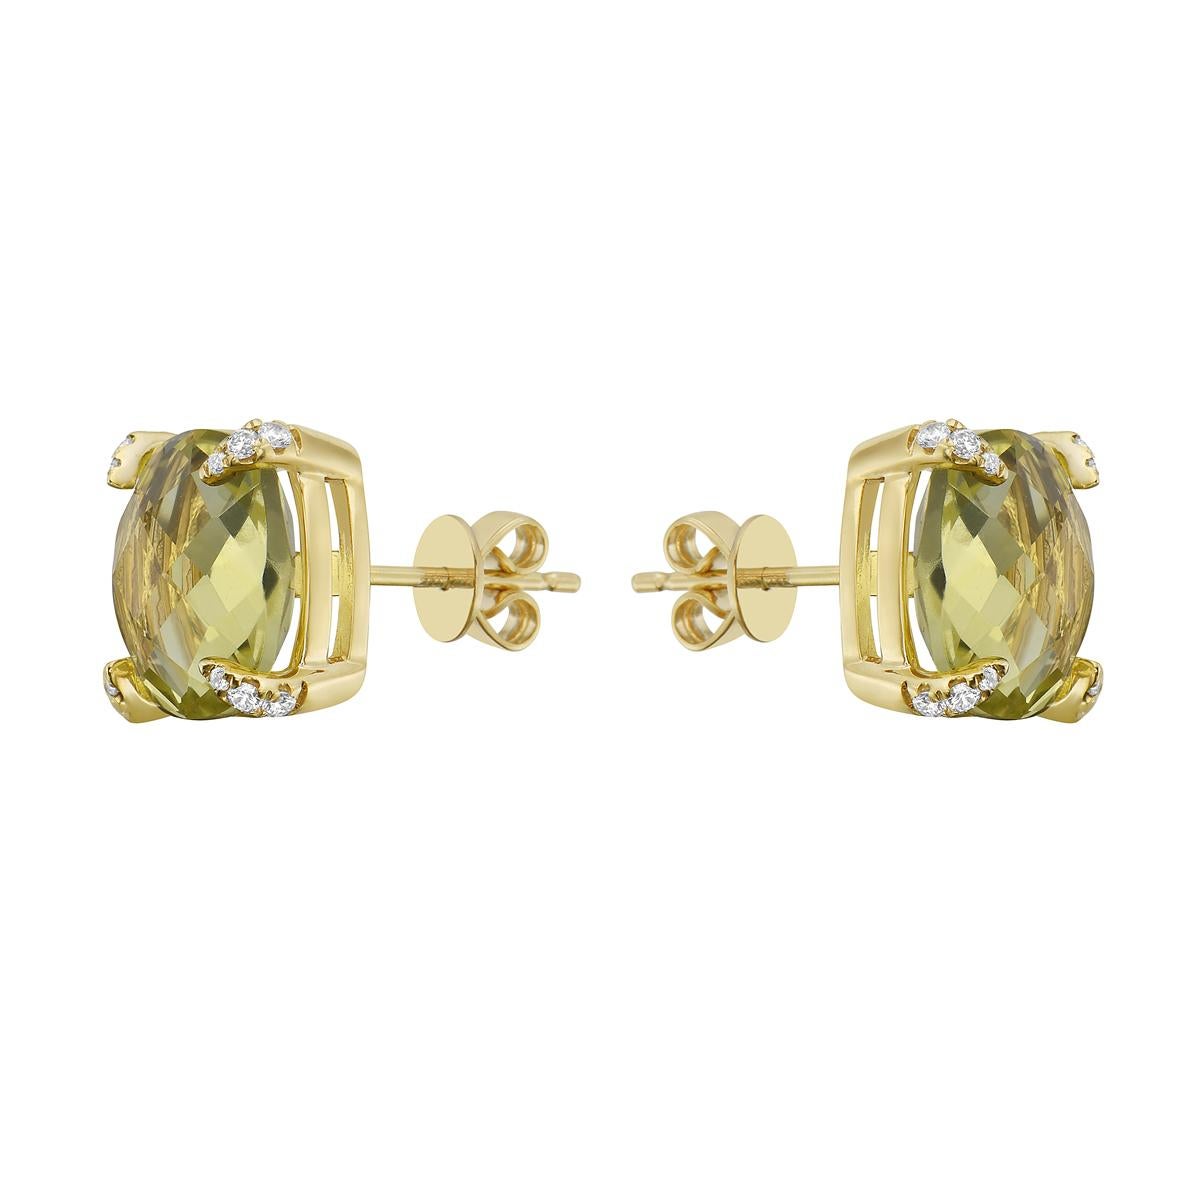 With these exquisite semi-precious yellow-gold gold-green quartz diamond earrings, style and glamour are in the spotlight. These 14-karat cushion cut earrings are made from 2.8 grams of gold, 2 gold green quartz's totaling 6.92 karats, and is